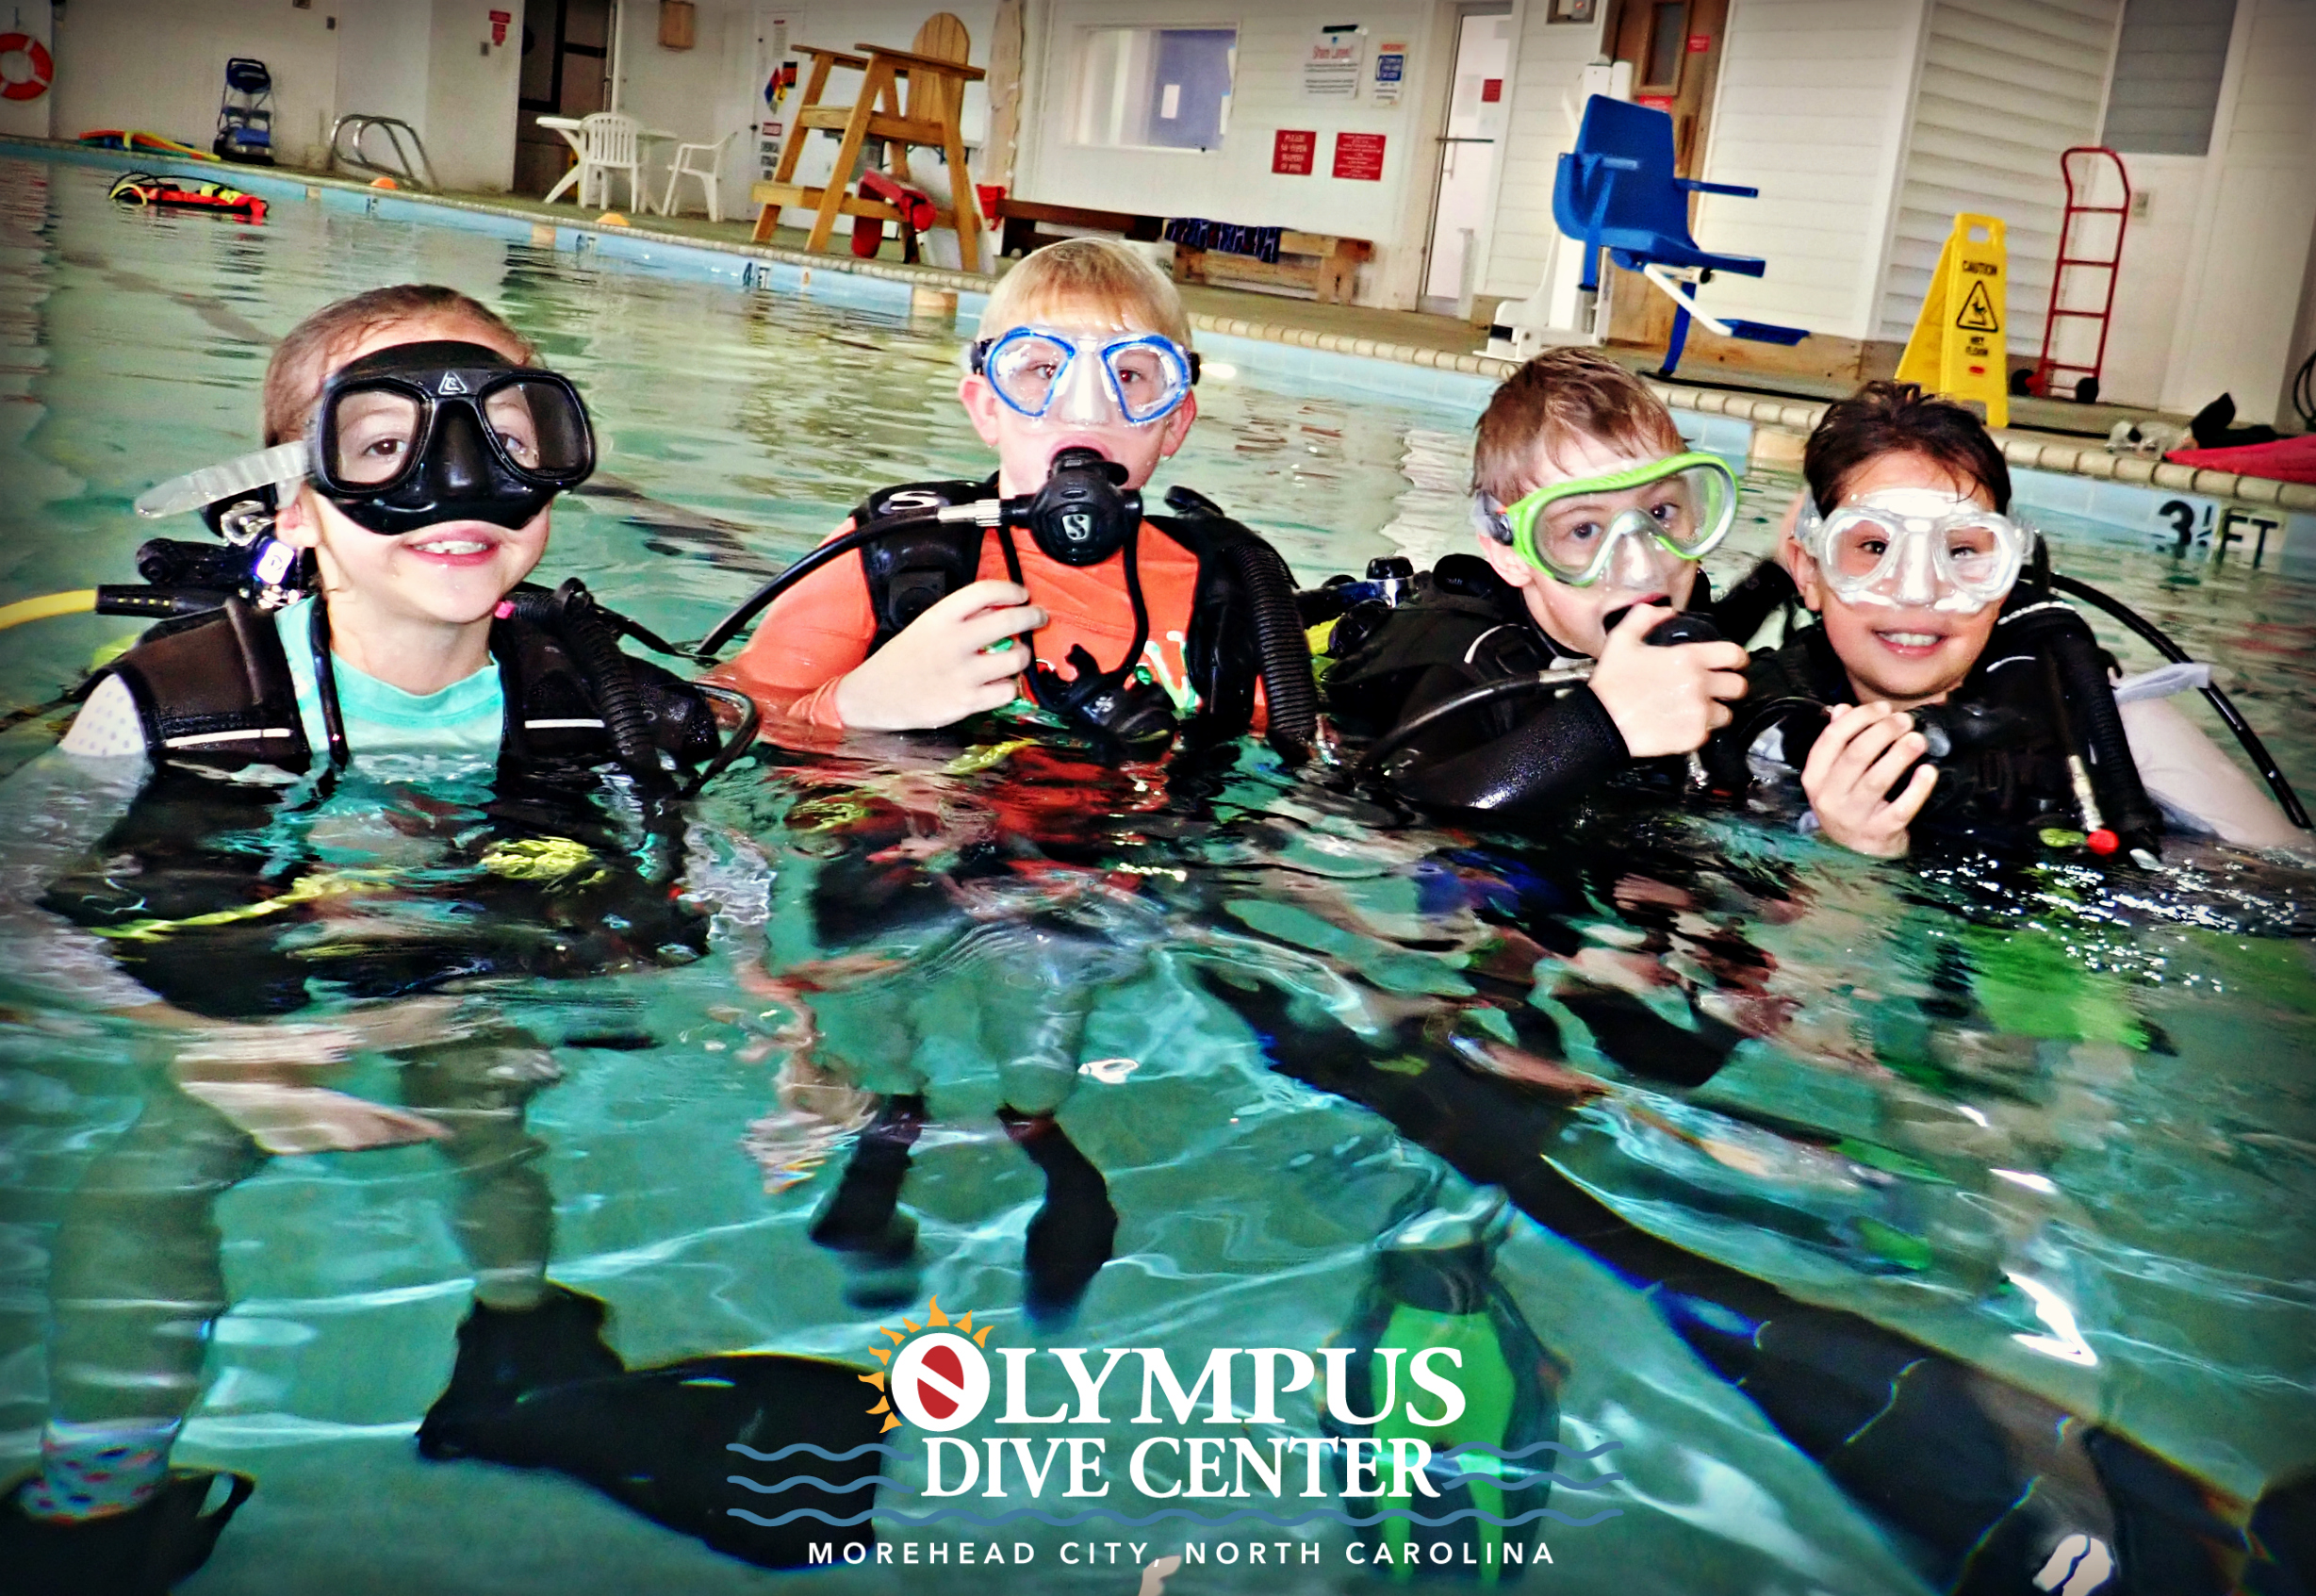 It's A Family Affair At Olympus Dive Center